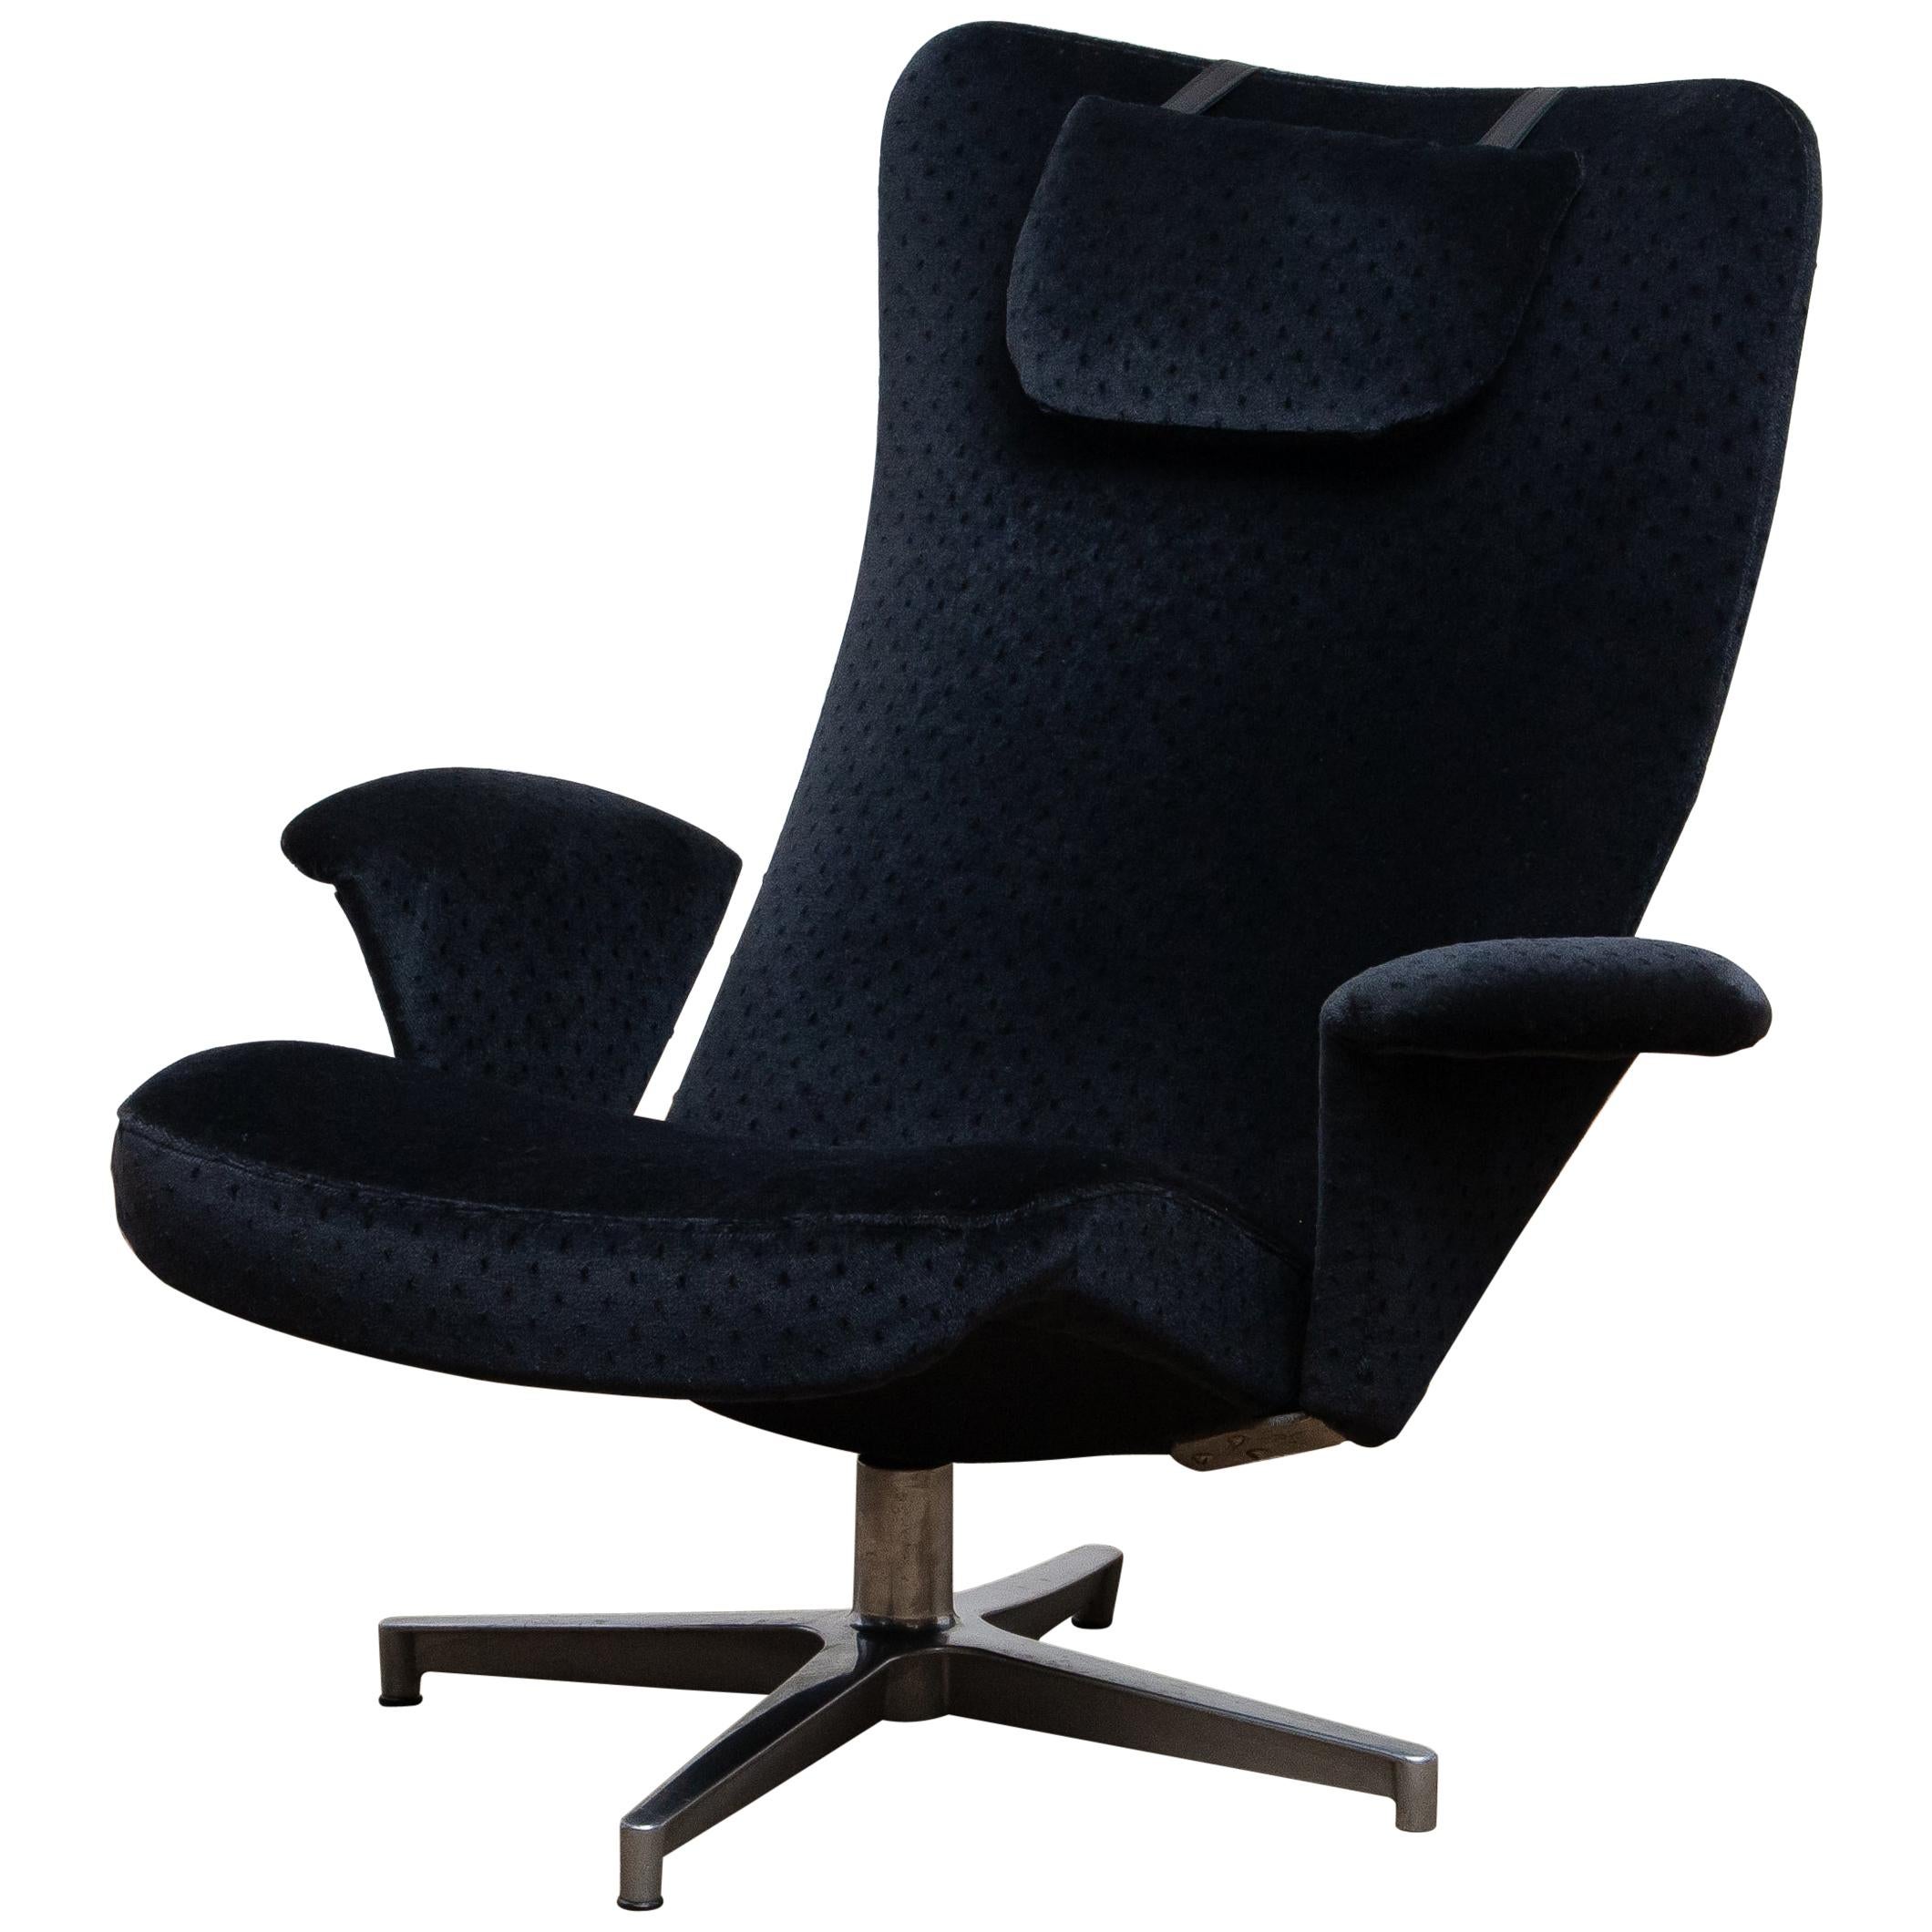 Extremely comfortable swivel chair model; Contourett Ronto